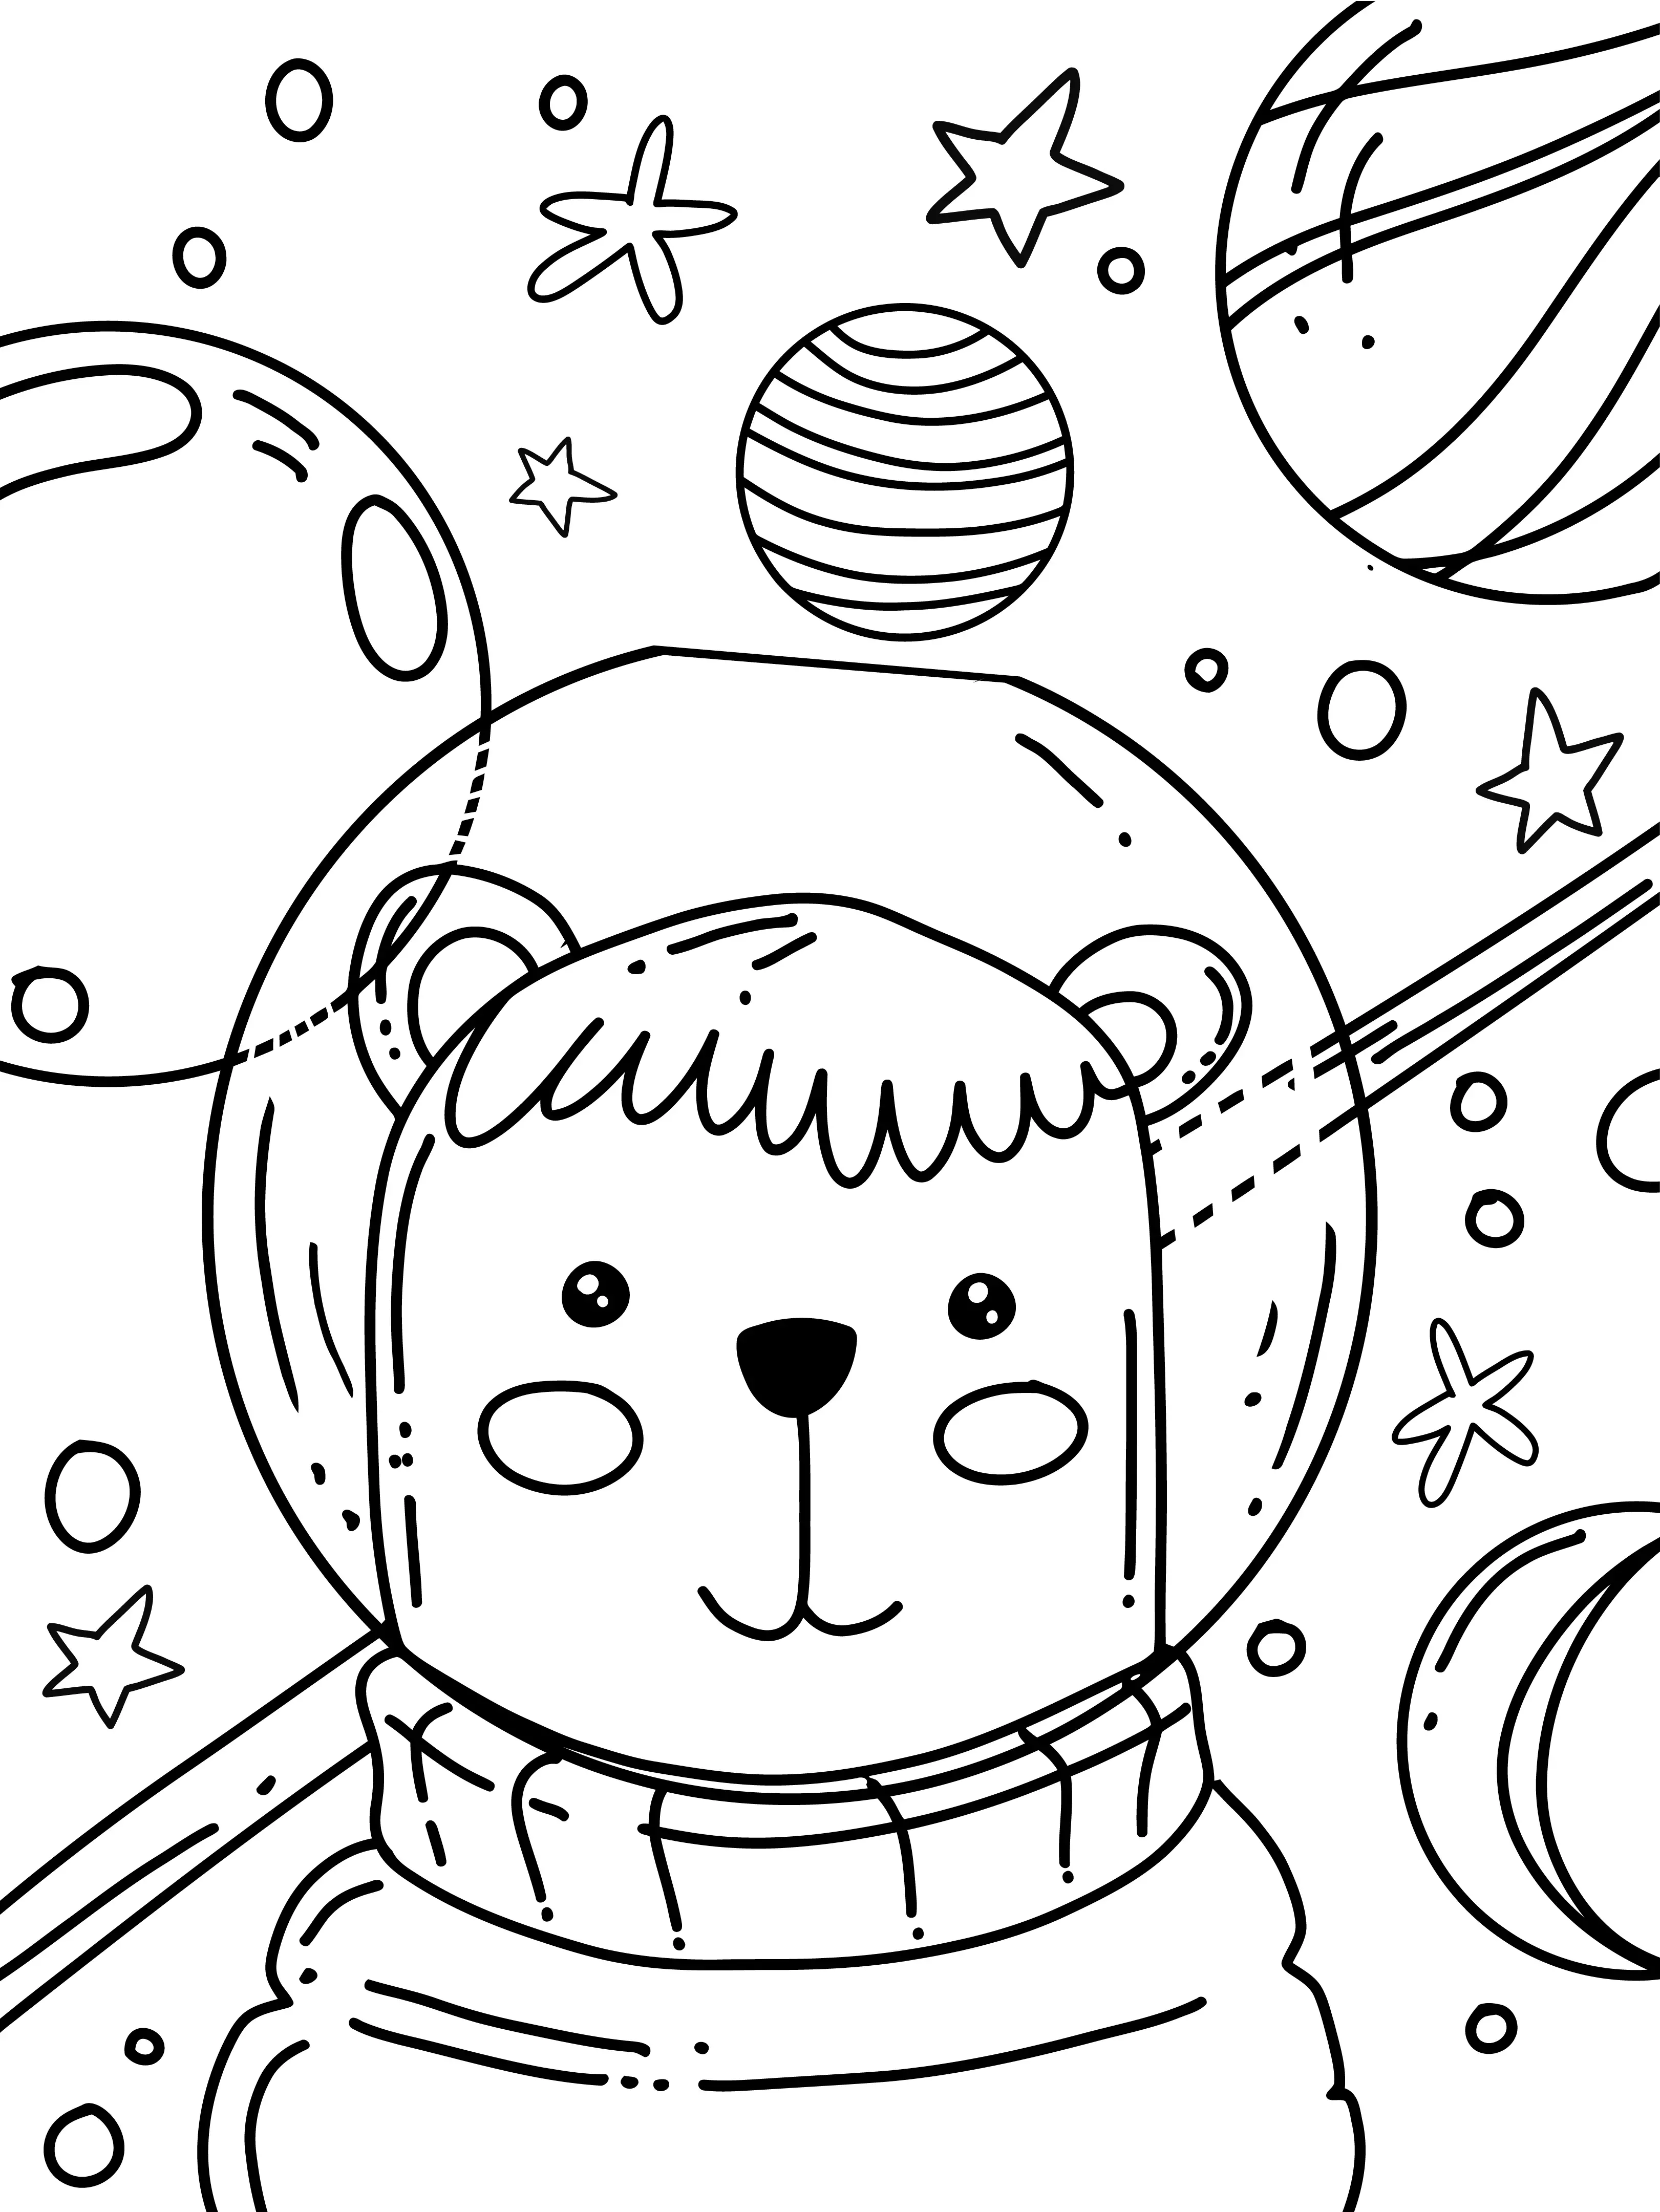 Animal Space Galaxy Planet Outerspace Astronaut Bear Coloring Page for Kids